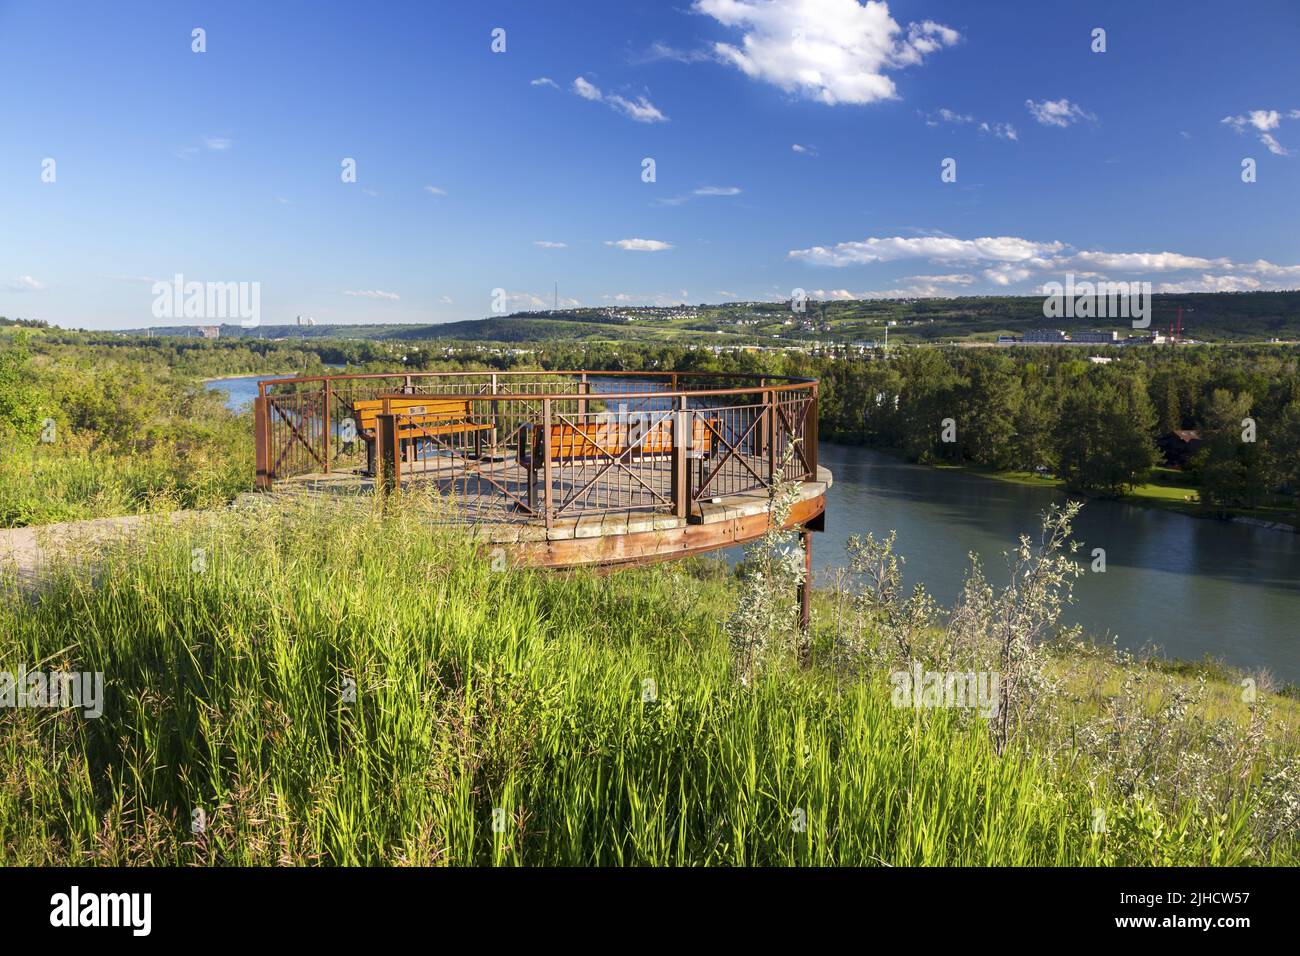 Observation Platform at East Bowmont Urban Recreation Park above Bow River with Green Prairie Grass and Distant Calgary, Alberta City Skyline Stock Photo